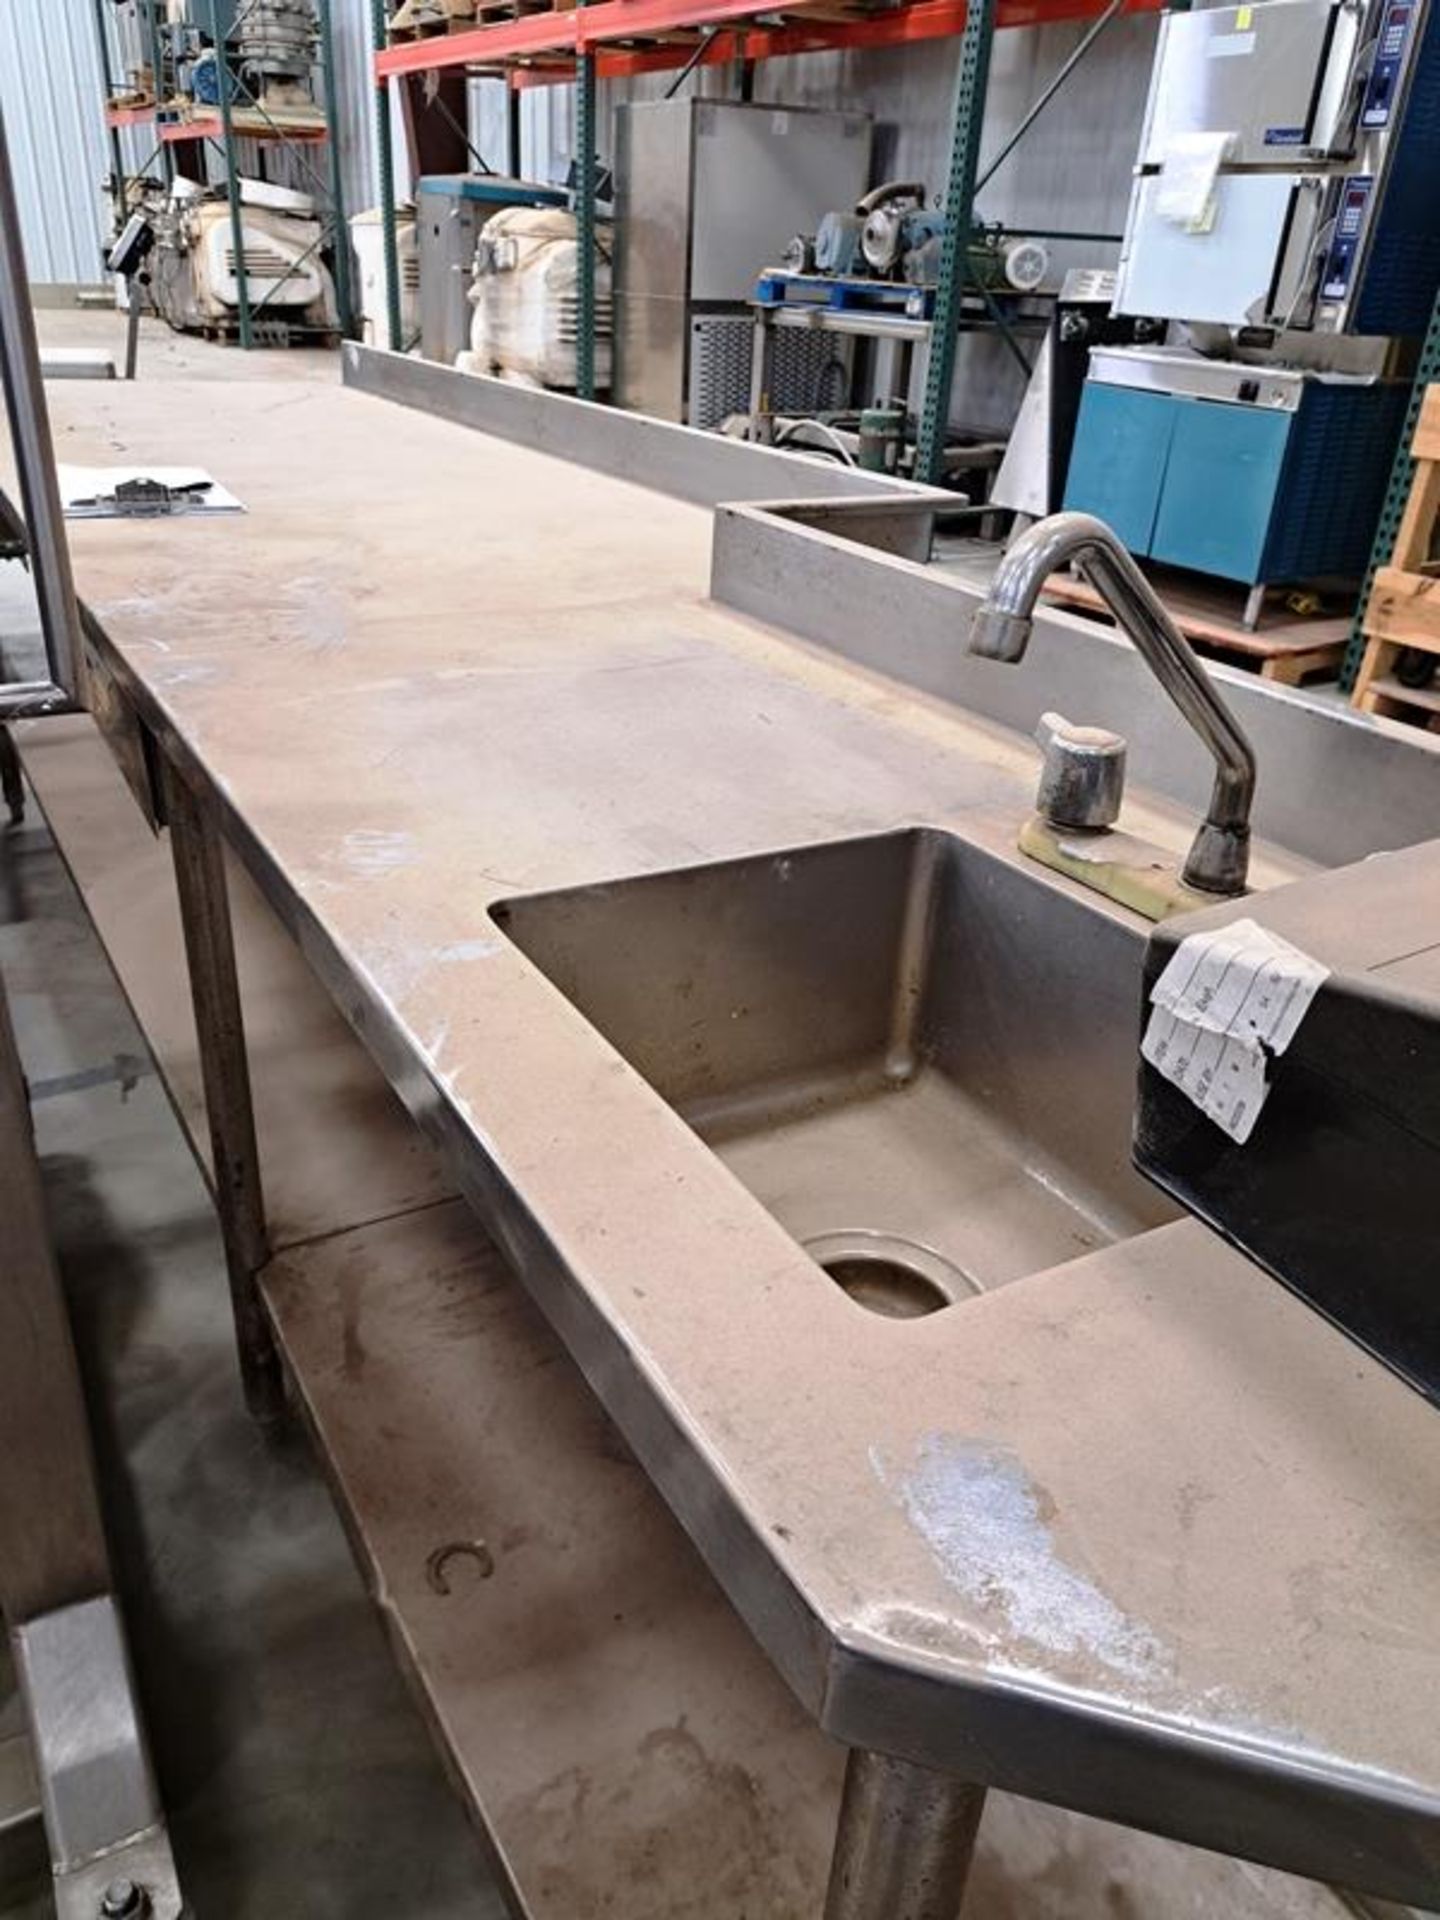 Stainless Steel Table with sink, 32" wide X 12' long, 4" backsplash (Required Loading Fee: $50.00) - Image 3 of 3